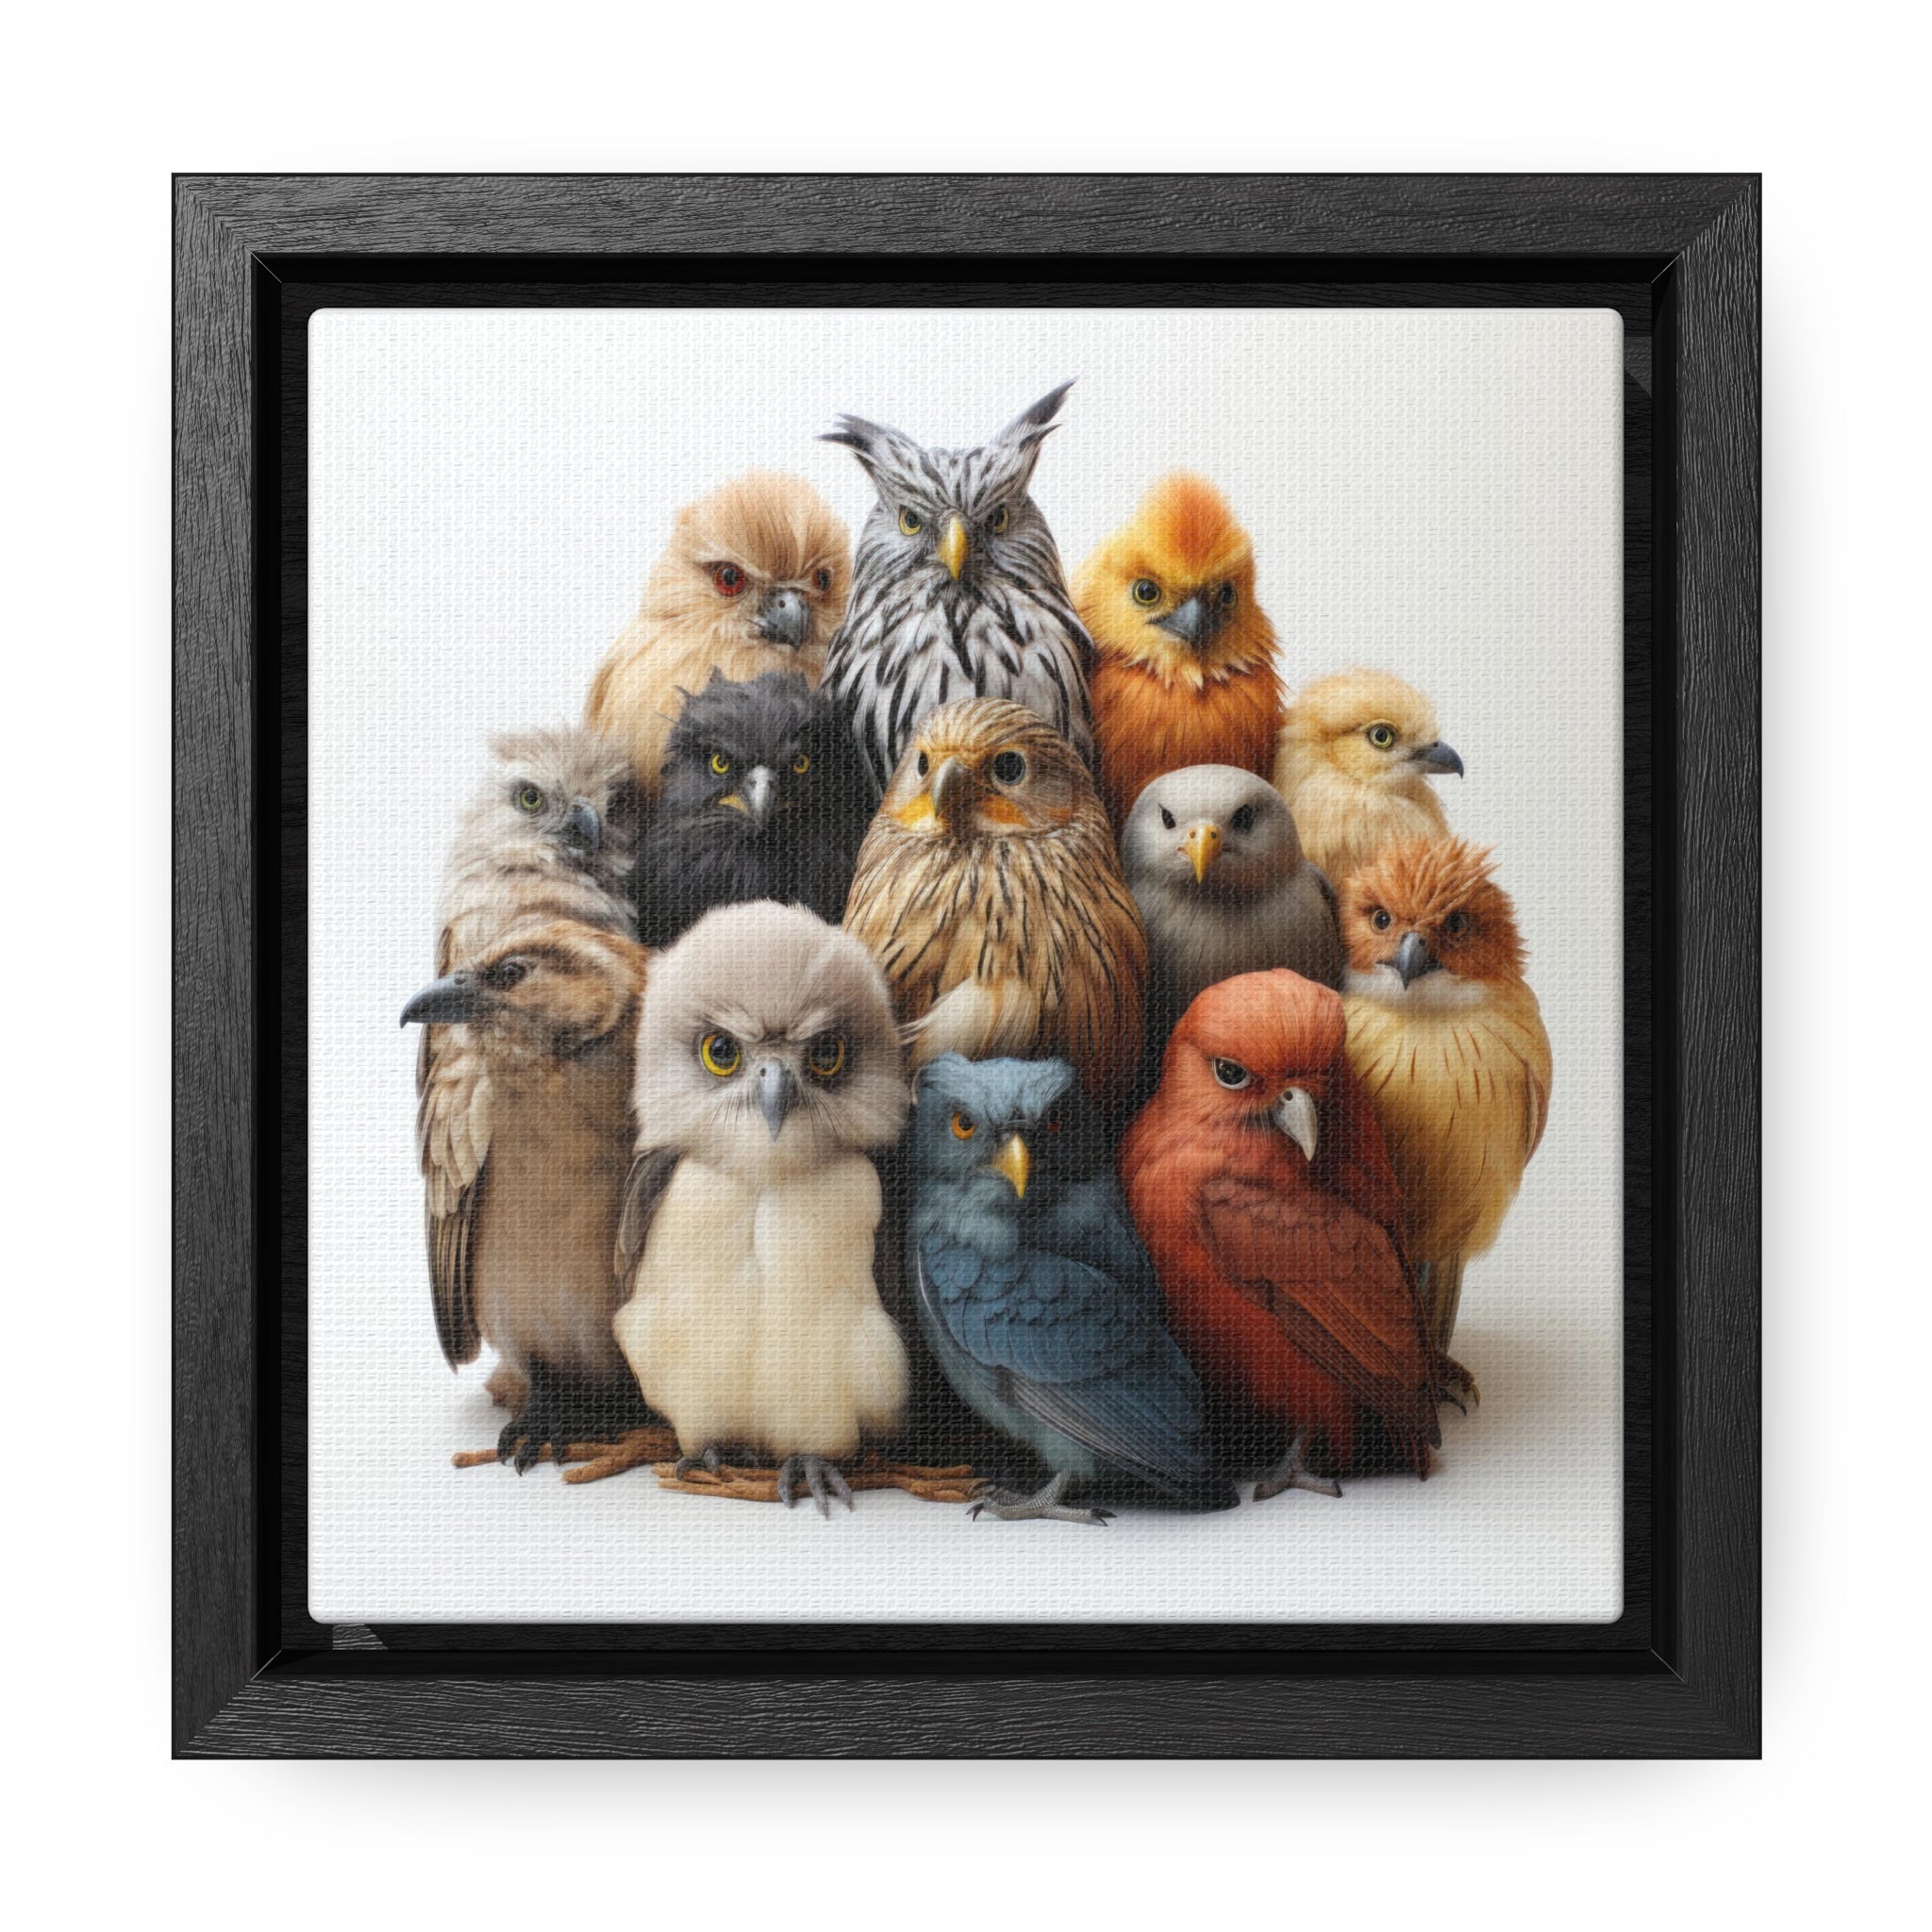 Colourful Owl's | Gallery Canvas Wraps, Square Frame